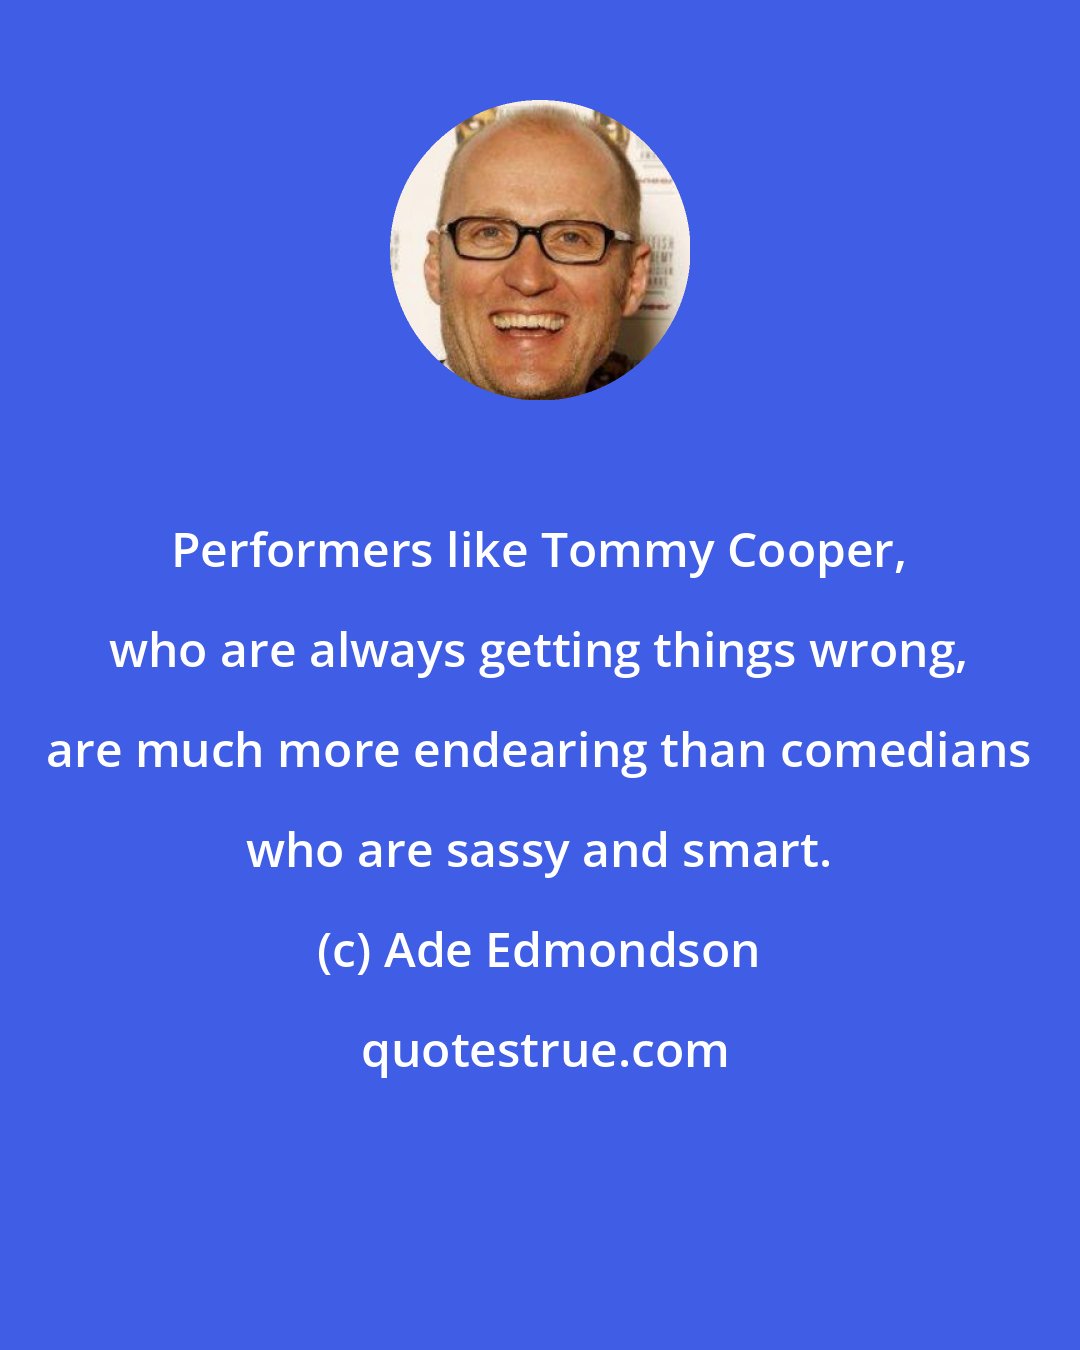 Ade Edmondson: Performers like Tommy Cooper, who are always getting things wrong, are much more endearing than comedians who are sassy and smart.